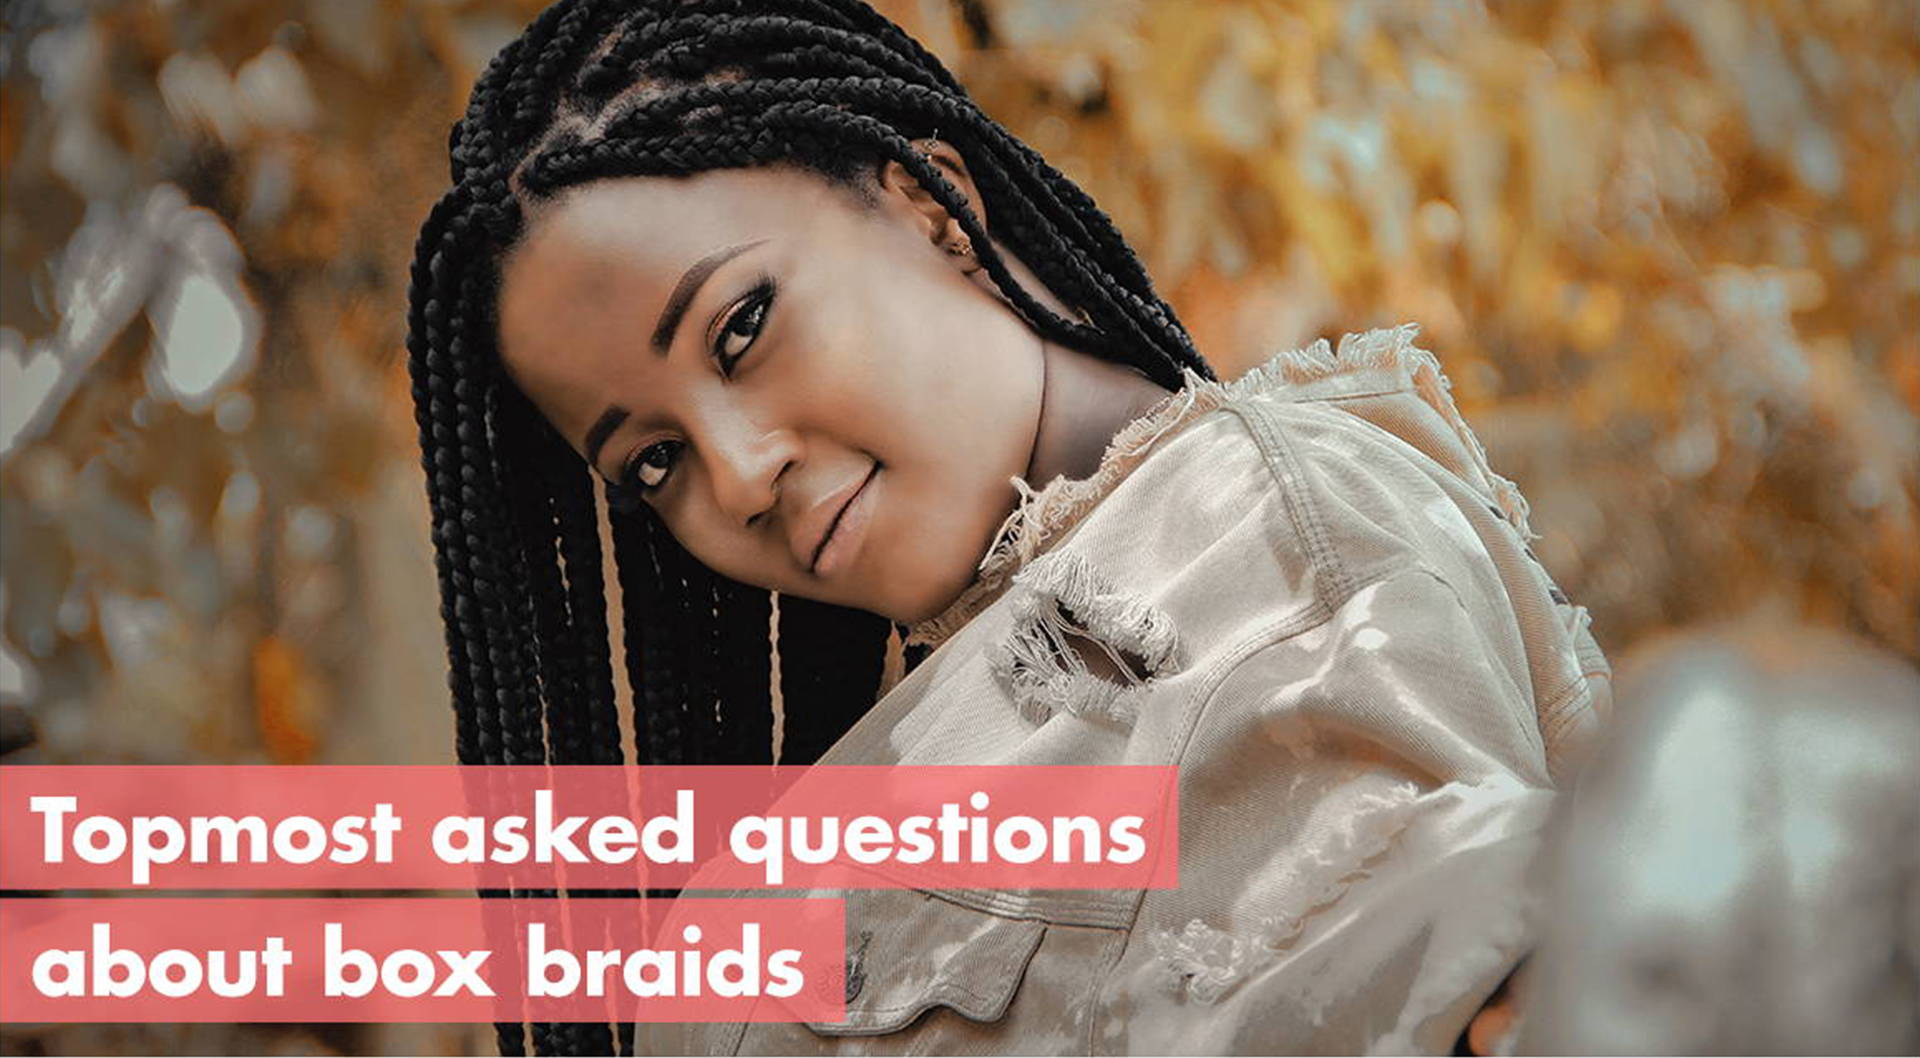 How Much Should You Pay for Braids? WOW Hair Braiding